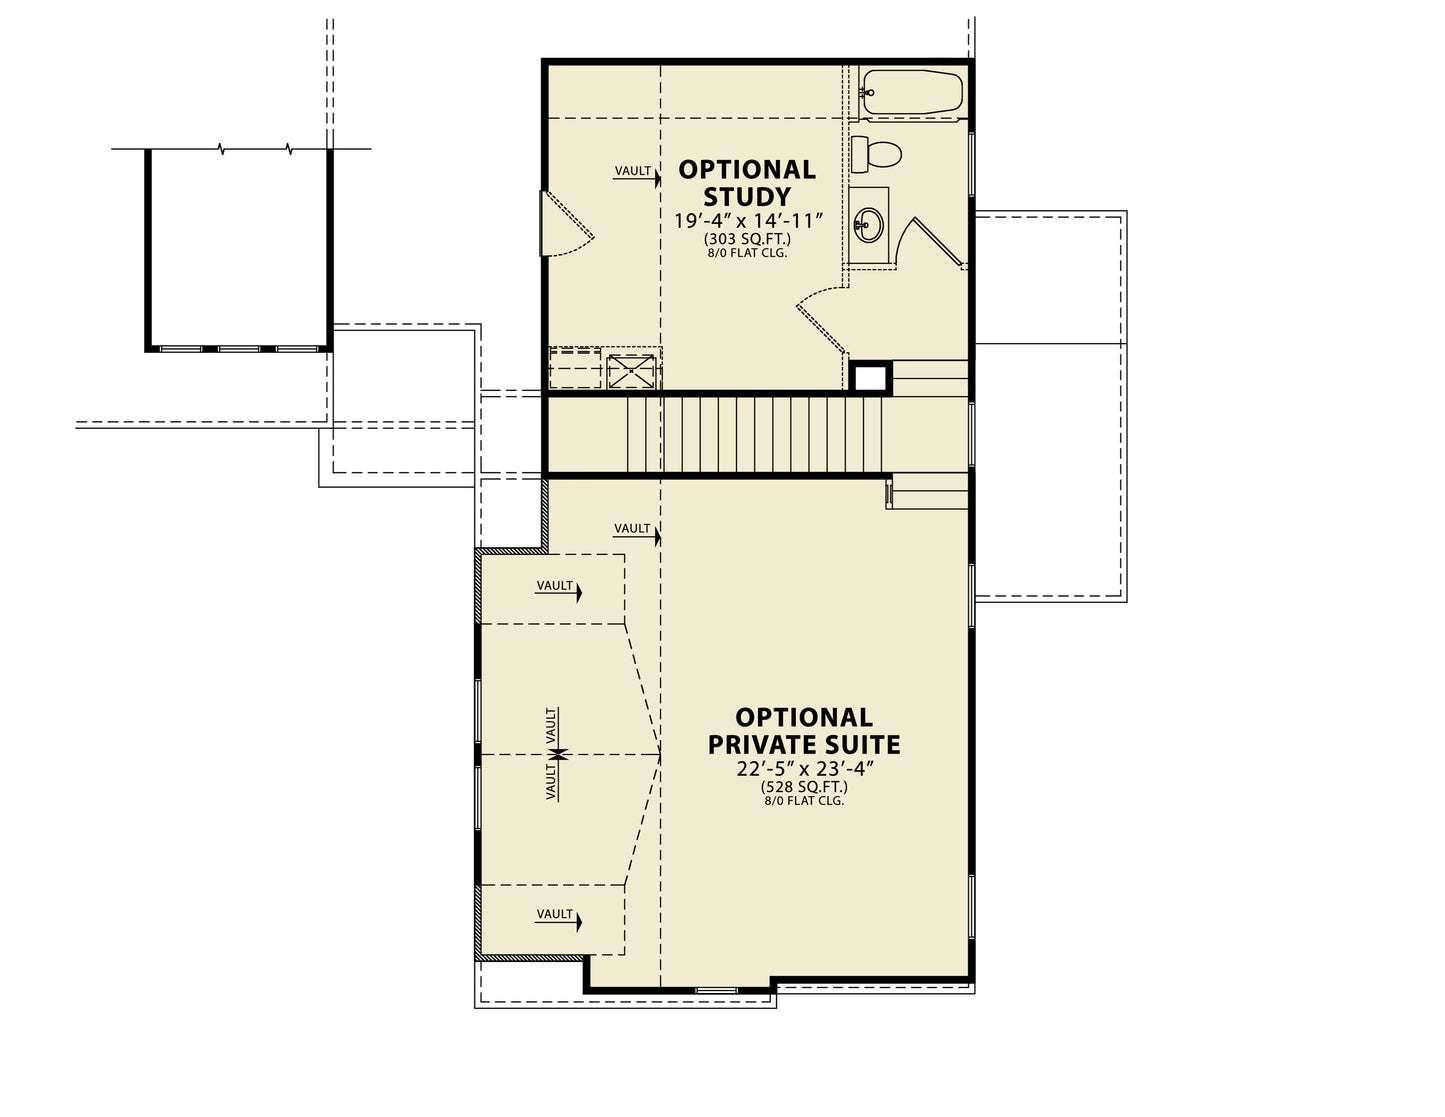 OPT. PRIVATE SUITE-OPTIONAL-STUDY - 20116 Floor_Plan